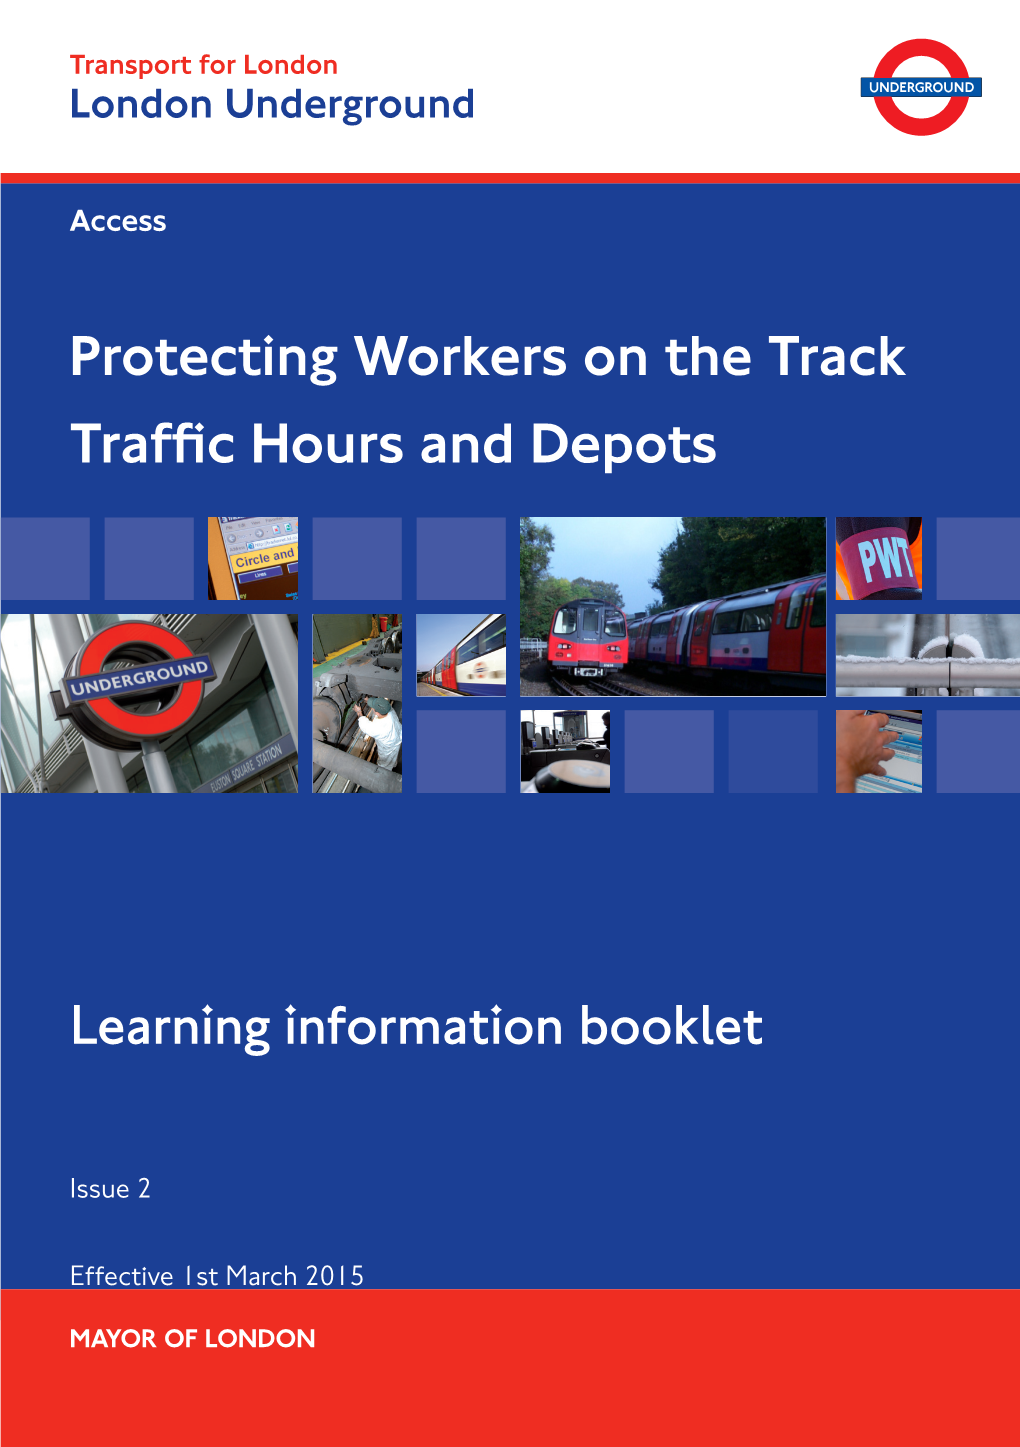 LU) to Safely Manage Worksites and Provide Protection for Themselves and Others in Traffic Hours